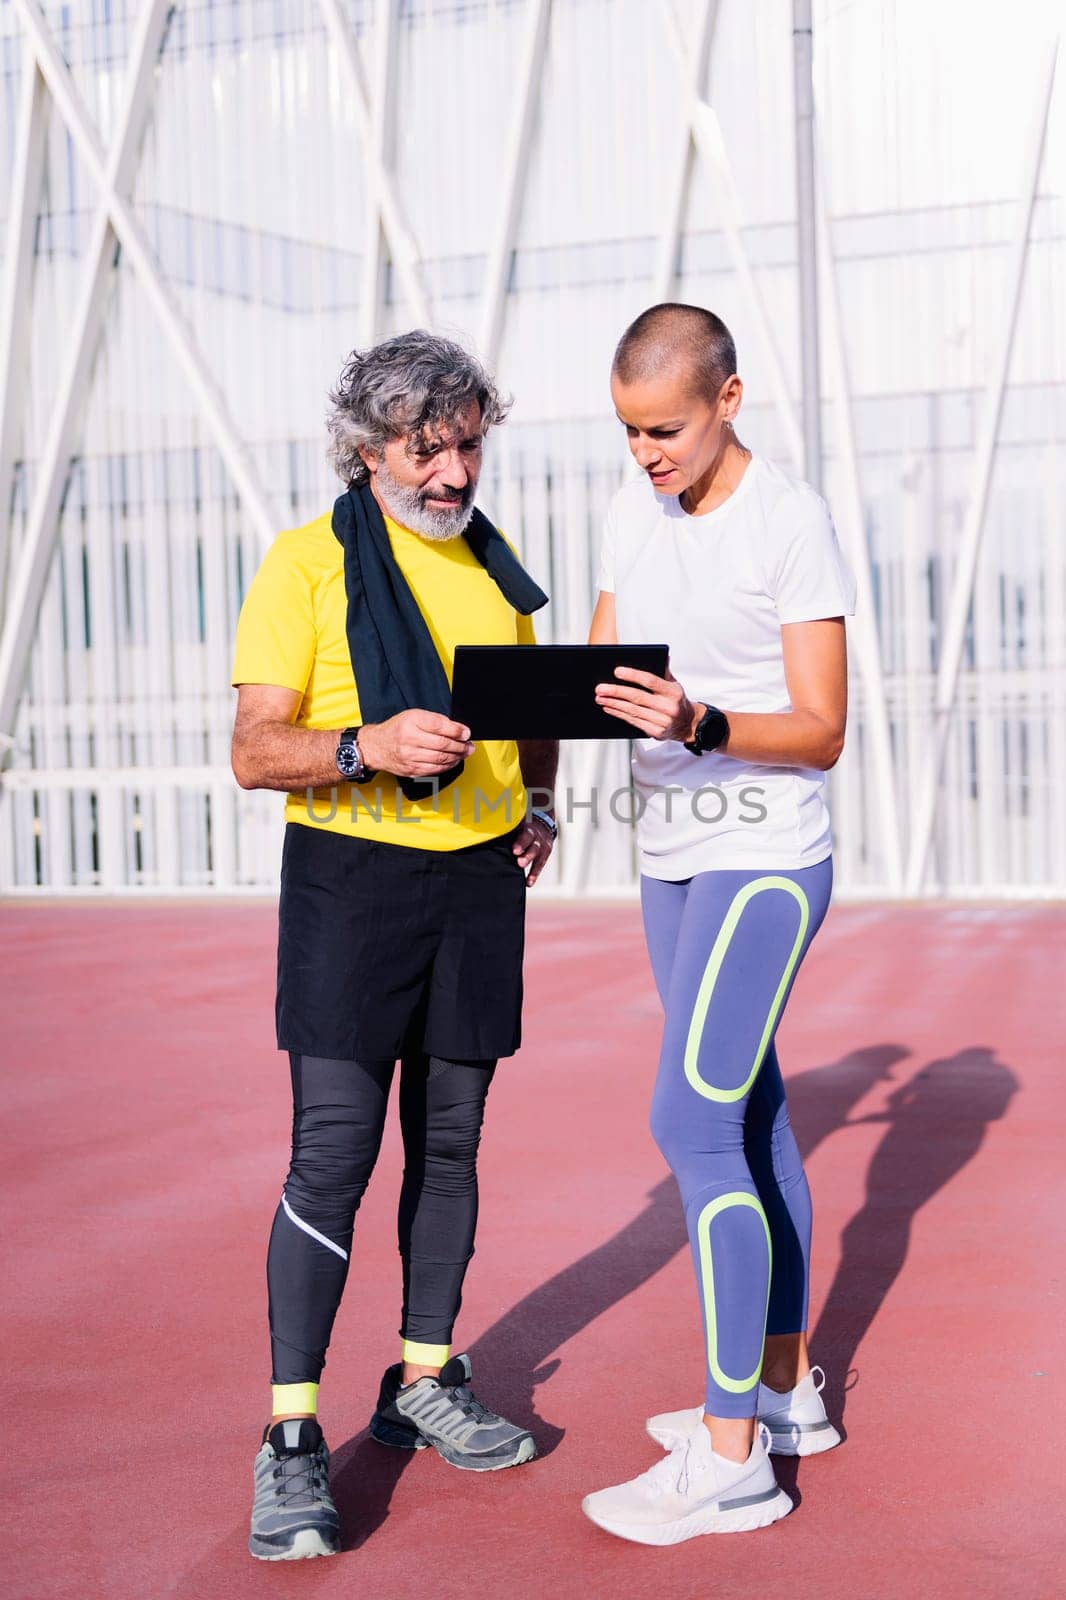 senior man planning workout with personal trainer by raulmelldo